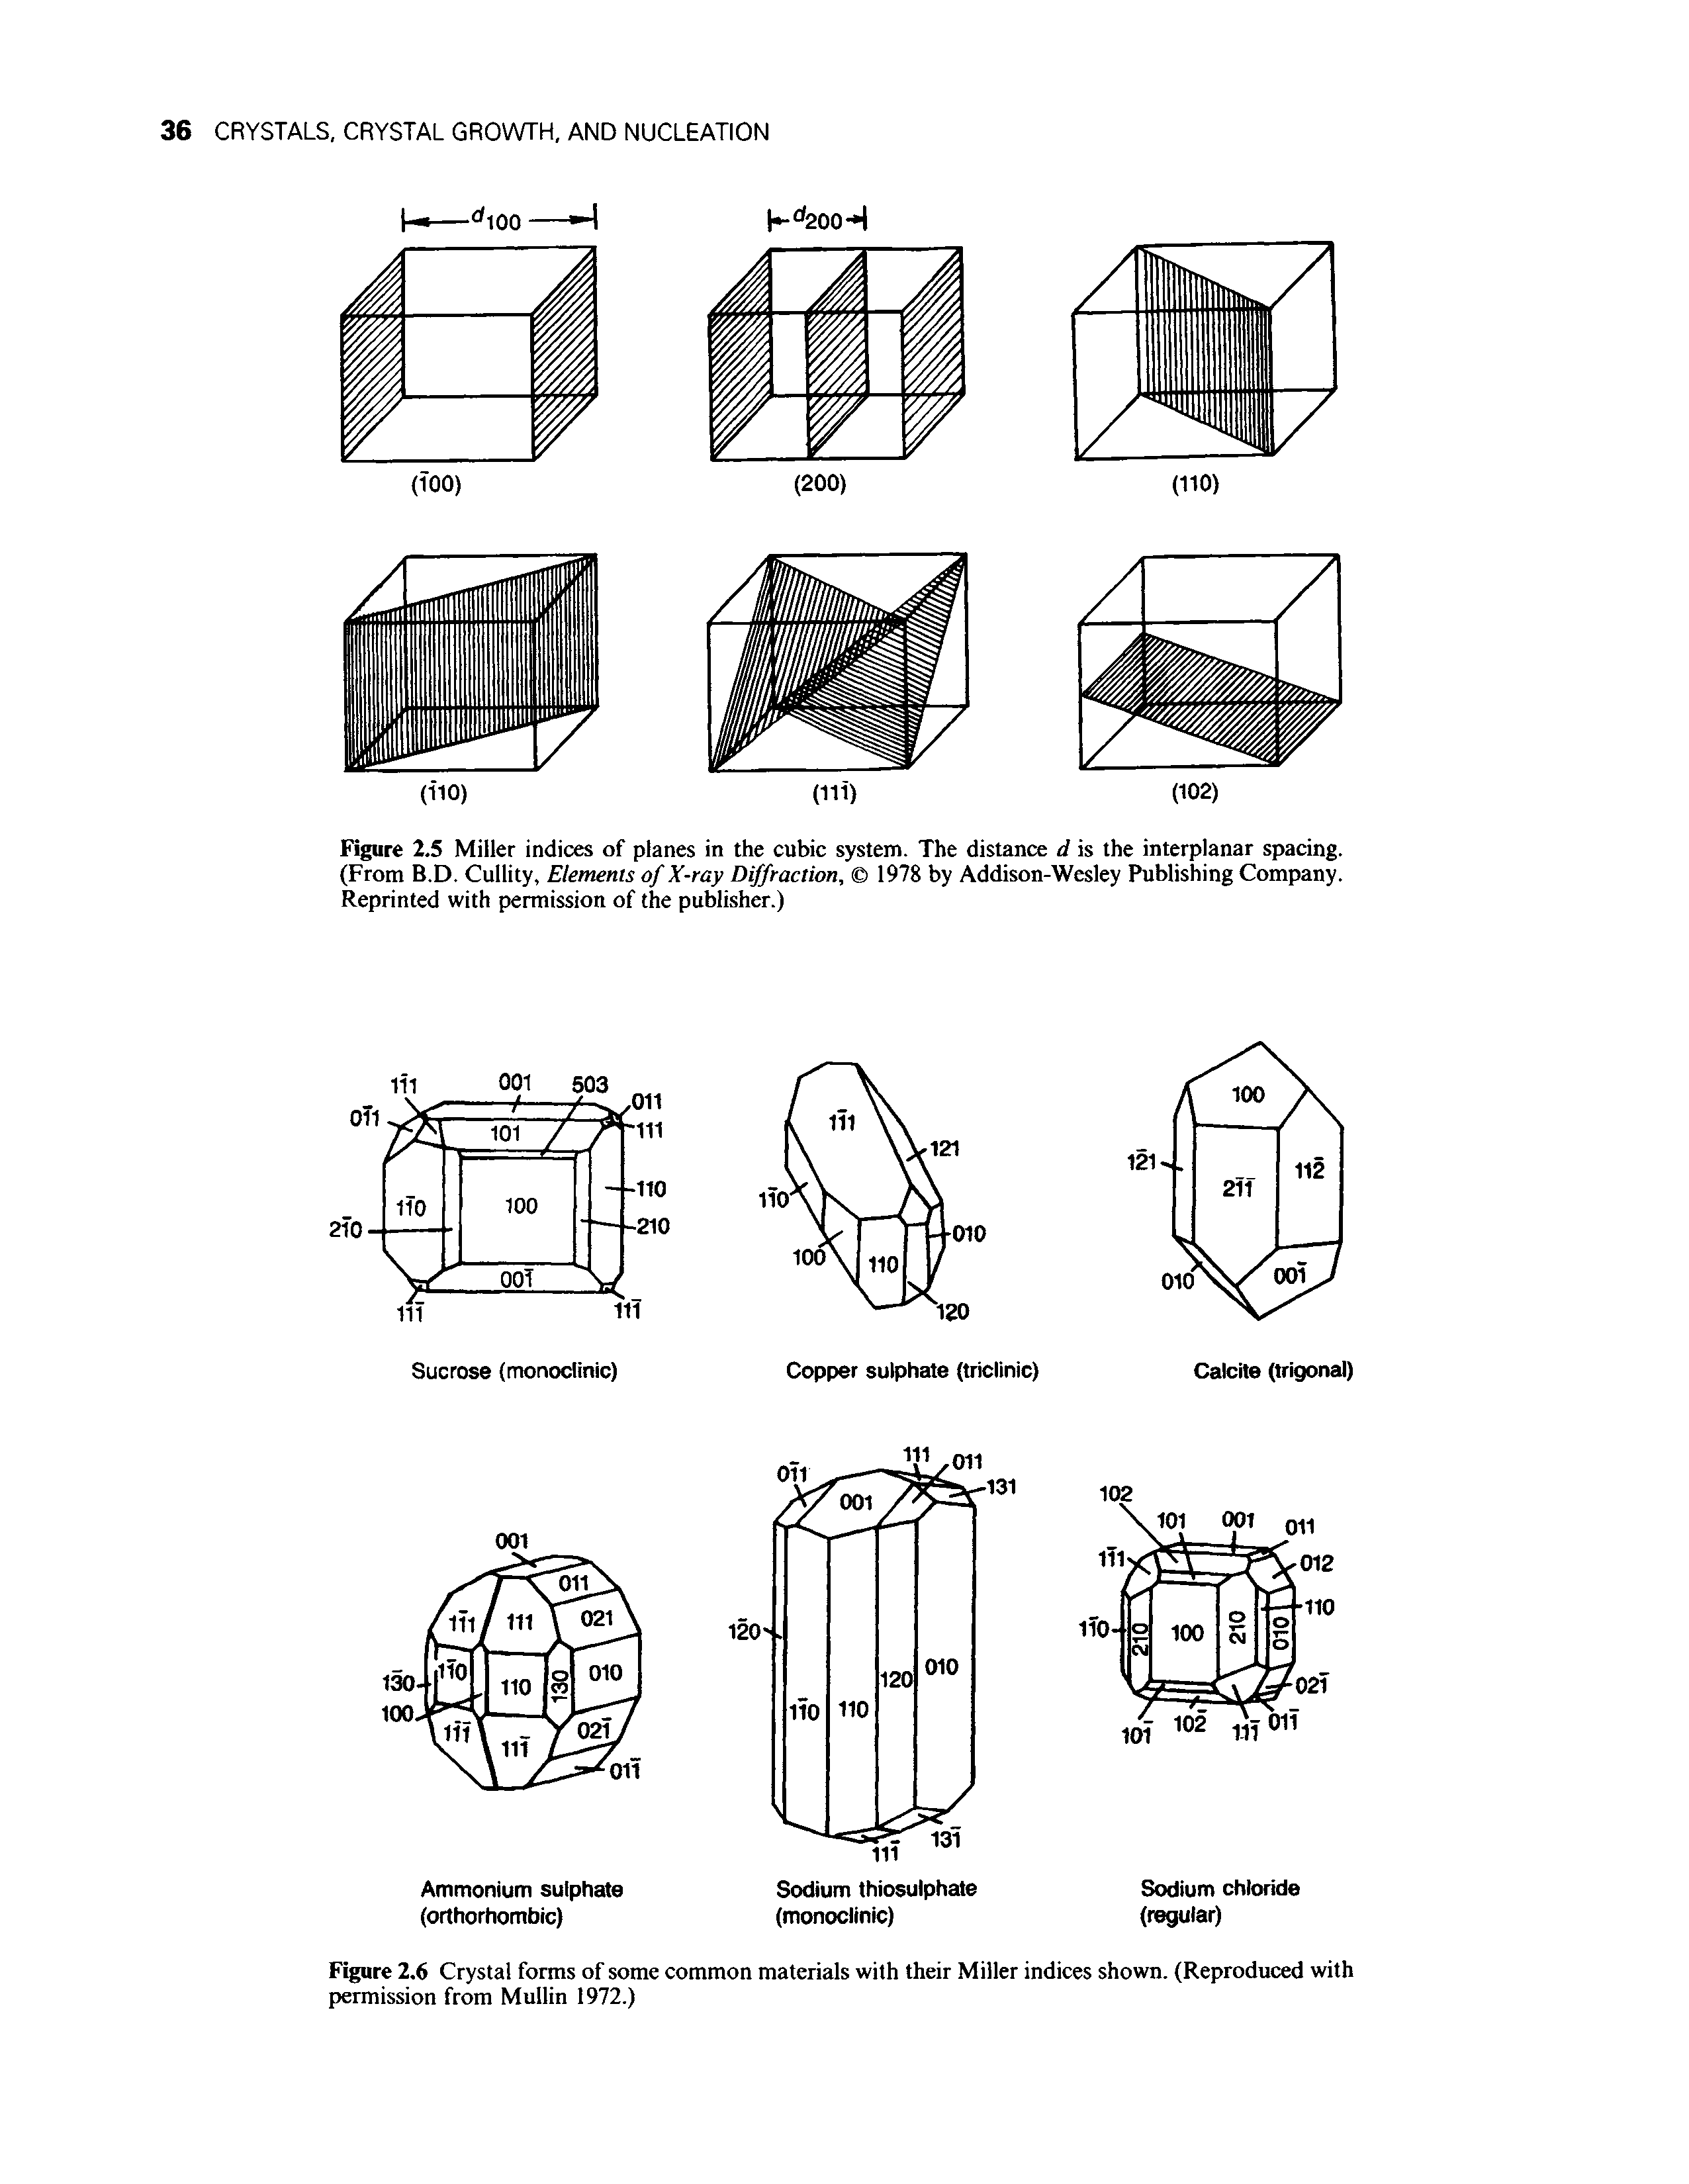 Figure 2.5 Miller indices of planes in the cubic system. The distance d is the interplanar spacing. (From B.D. Cullity, Elements of X-ray Diffraction, 1978 by Addison-Wesley Publishing Company. Reprinted with permission of the publisher.)...